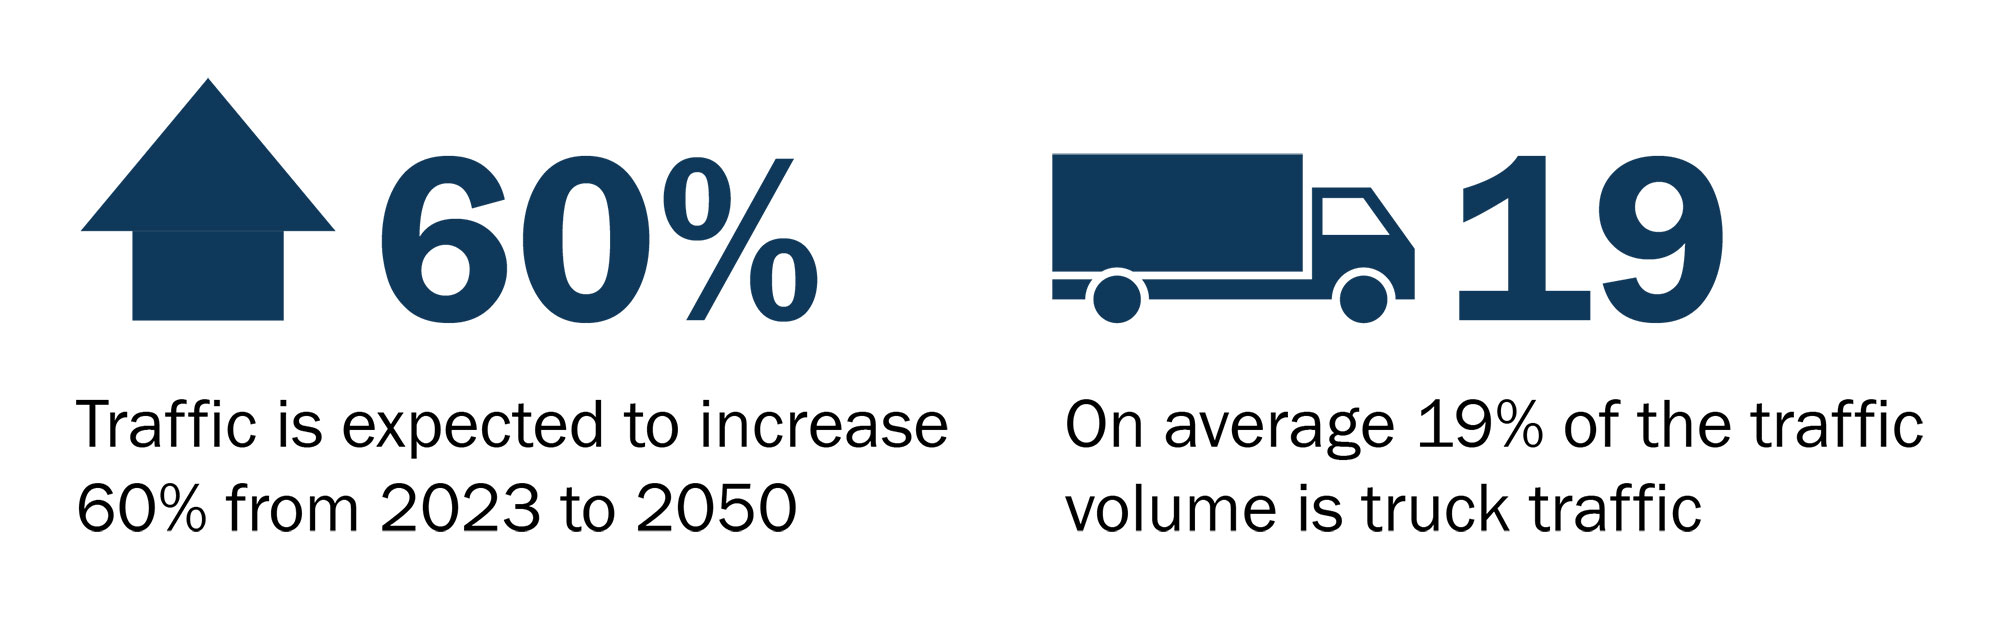 Traffic is expected to increase 60%, of which 19% is trucks on average